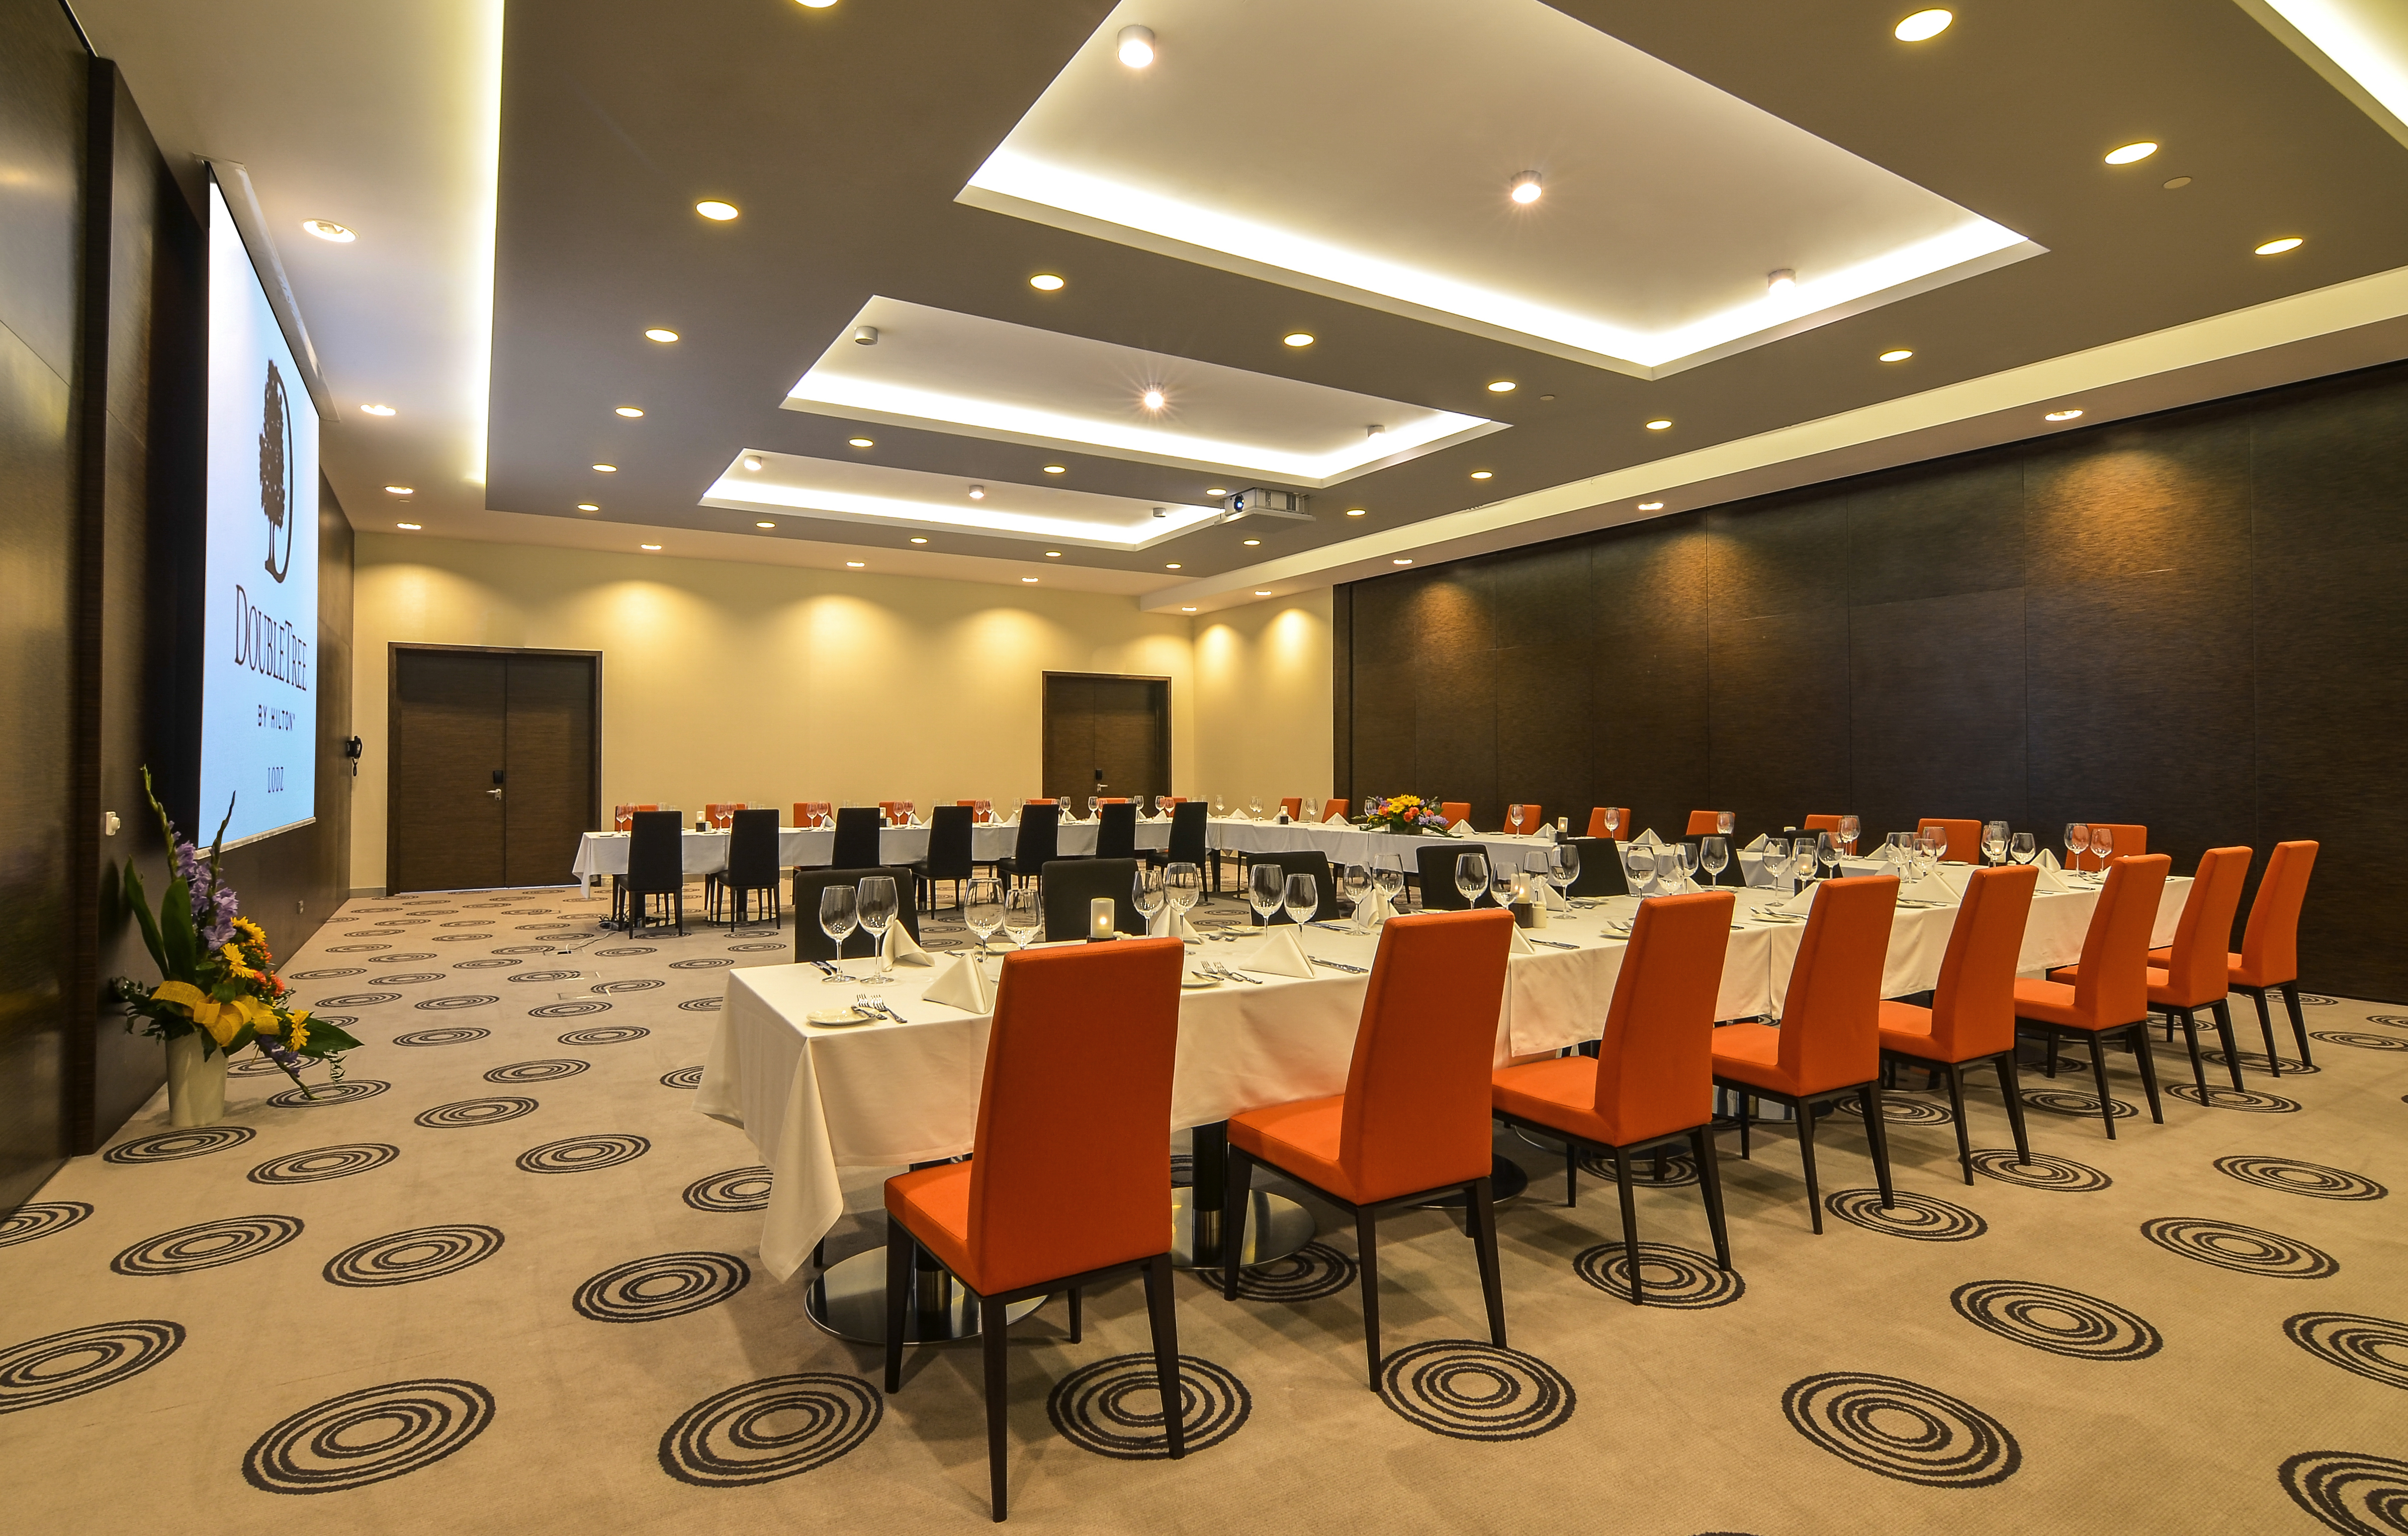 Coference and event space